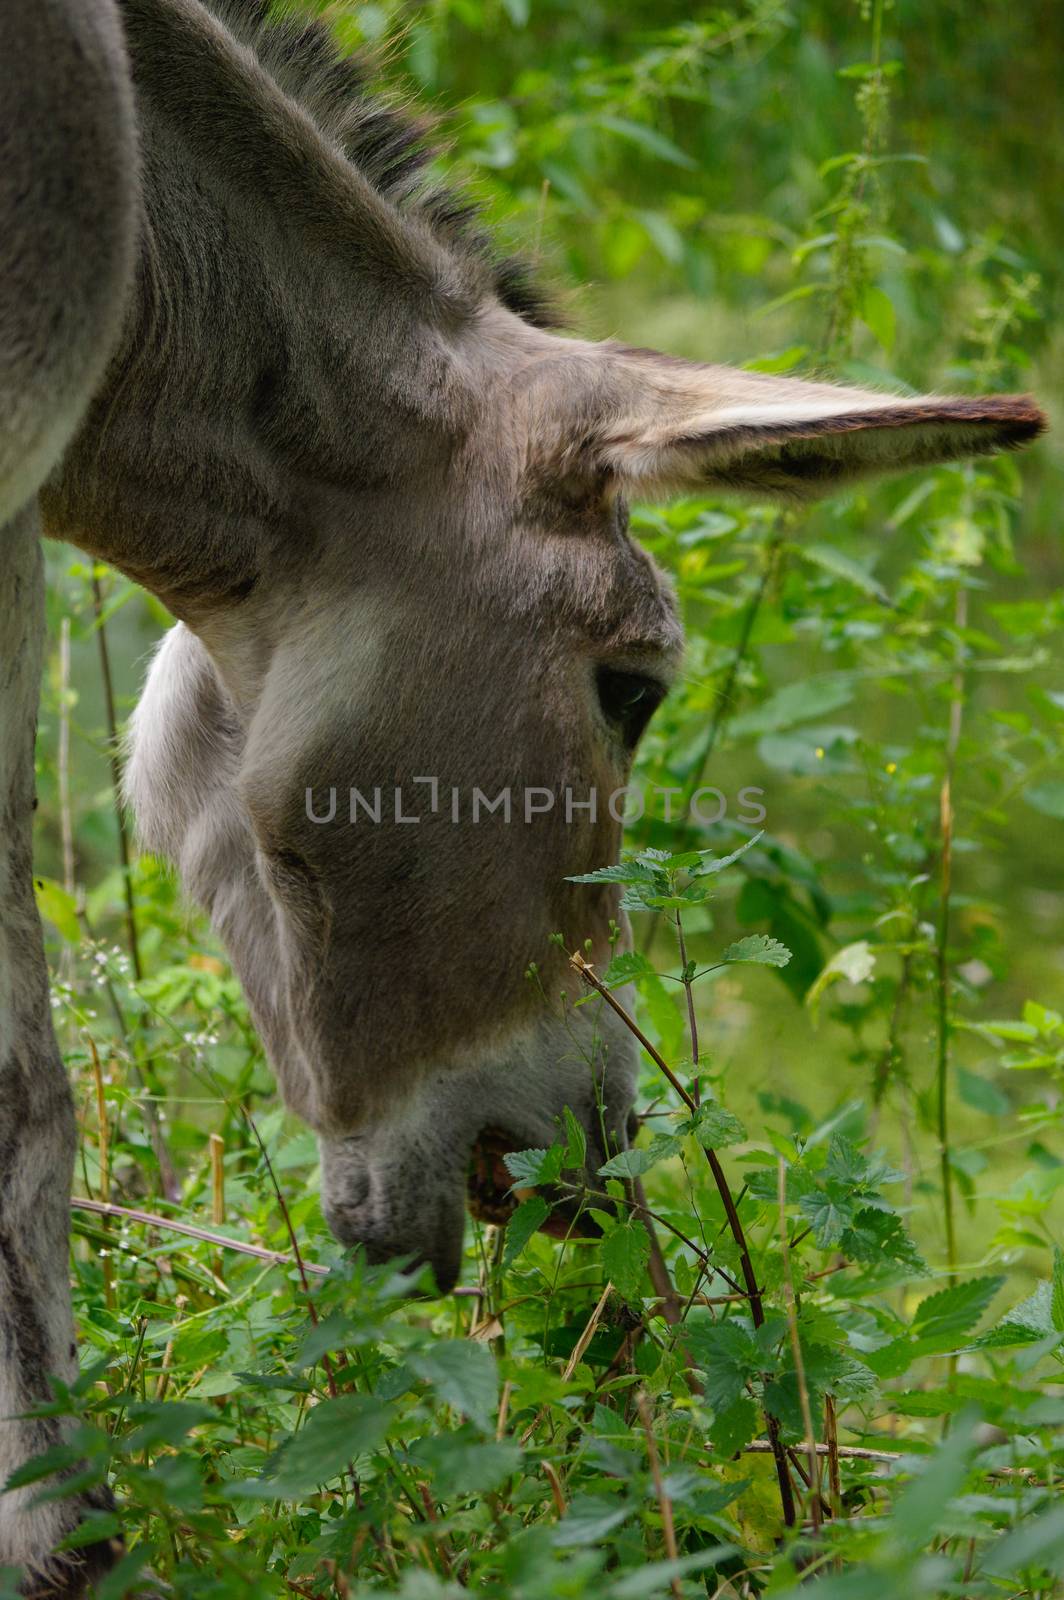 grey Donkey grazing on the field, close-up side view by evolutionnow